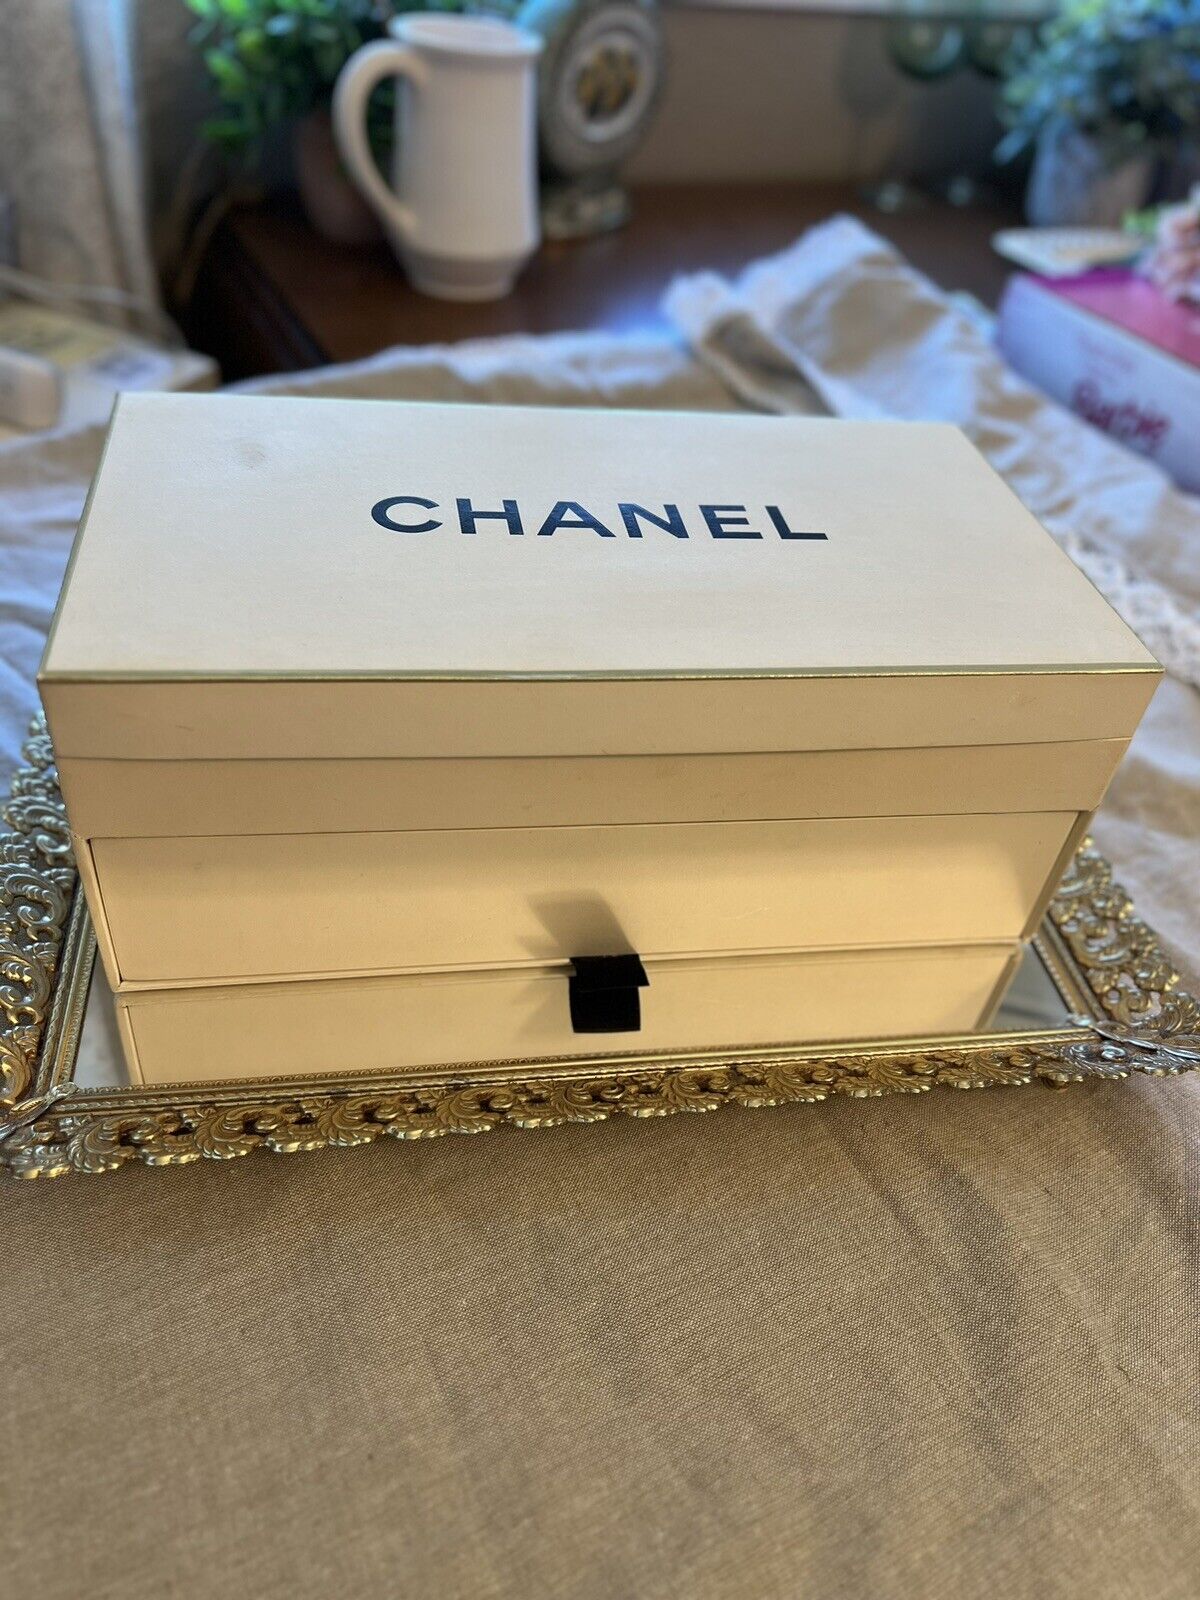 Rare Vintage Chanel Empty Gift Set Case. HTF VTG Collectible Makeup Jewelry Case